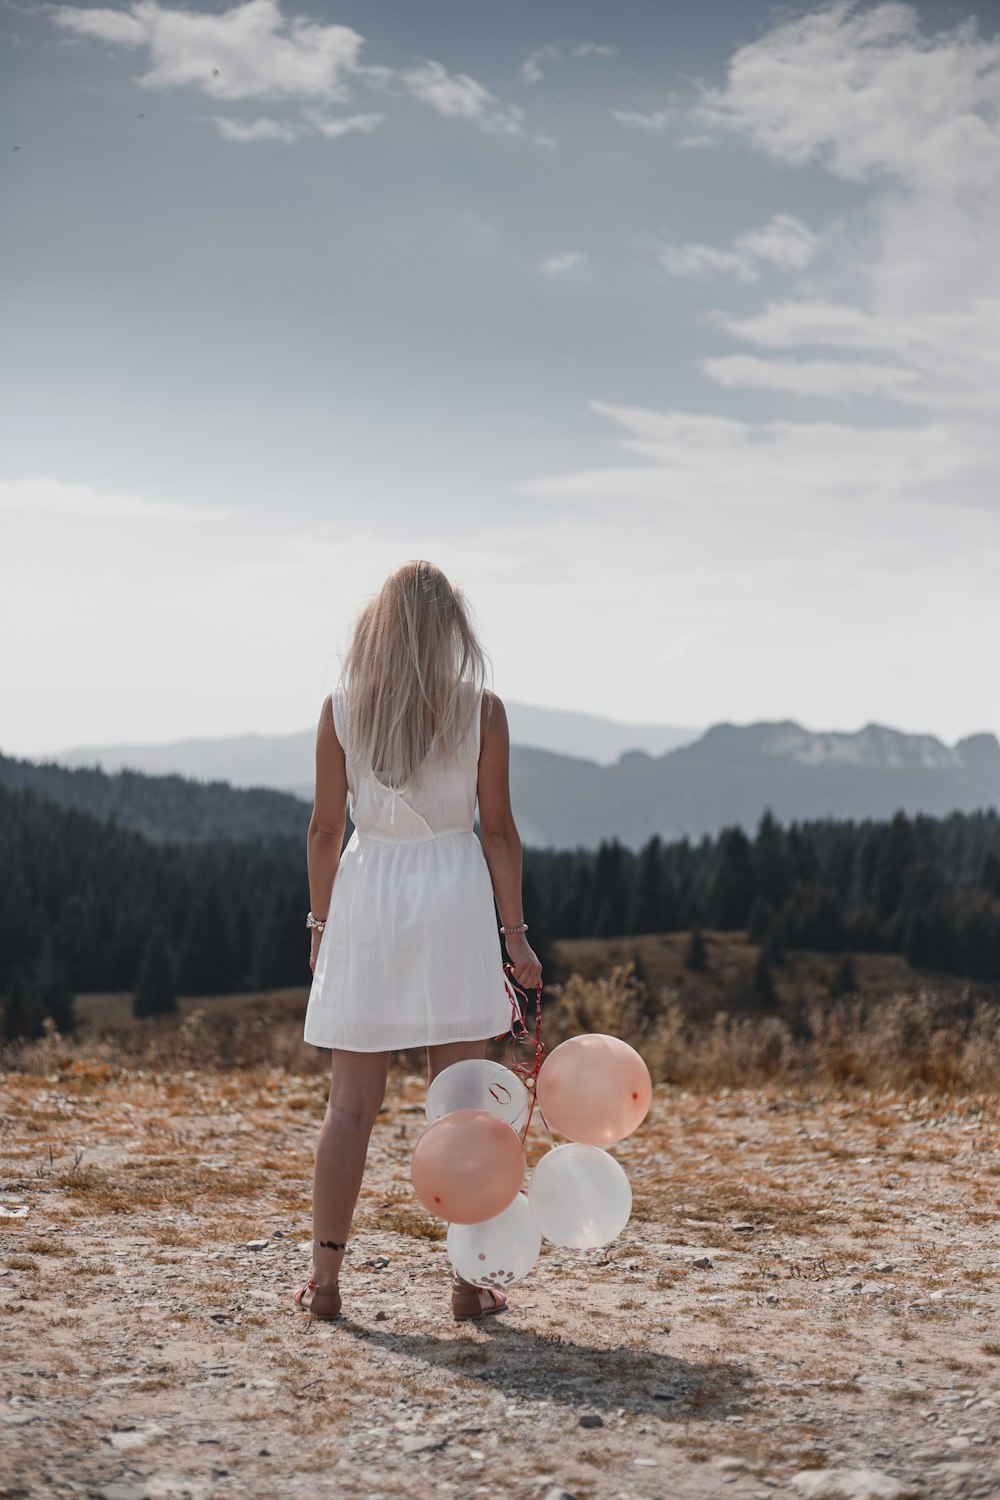 woman in white dress holding balloons